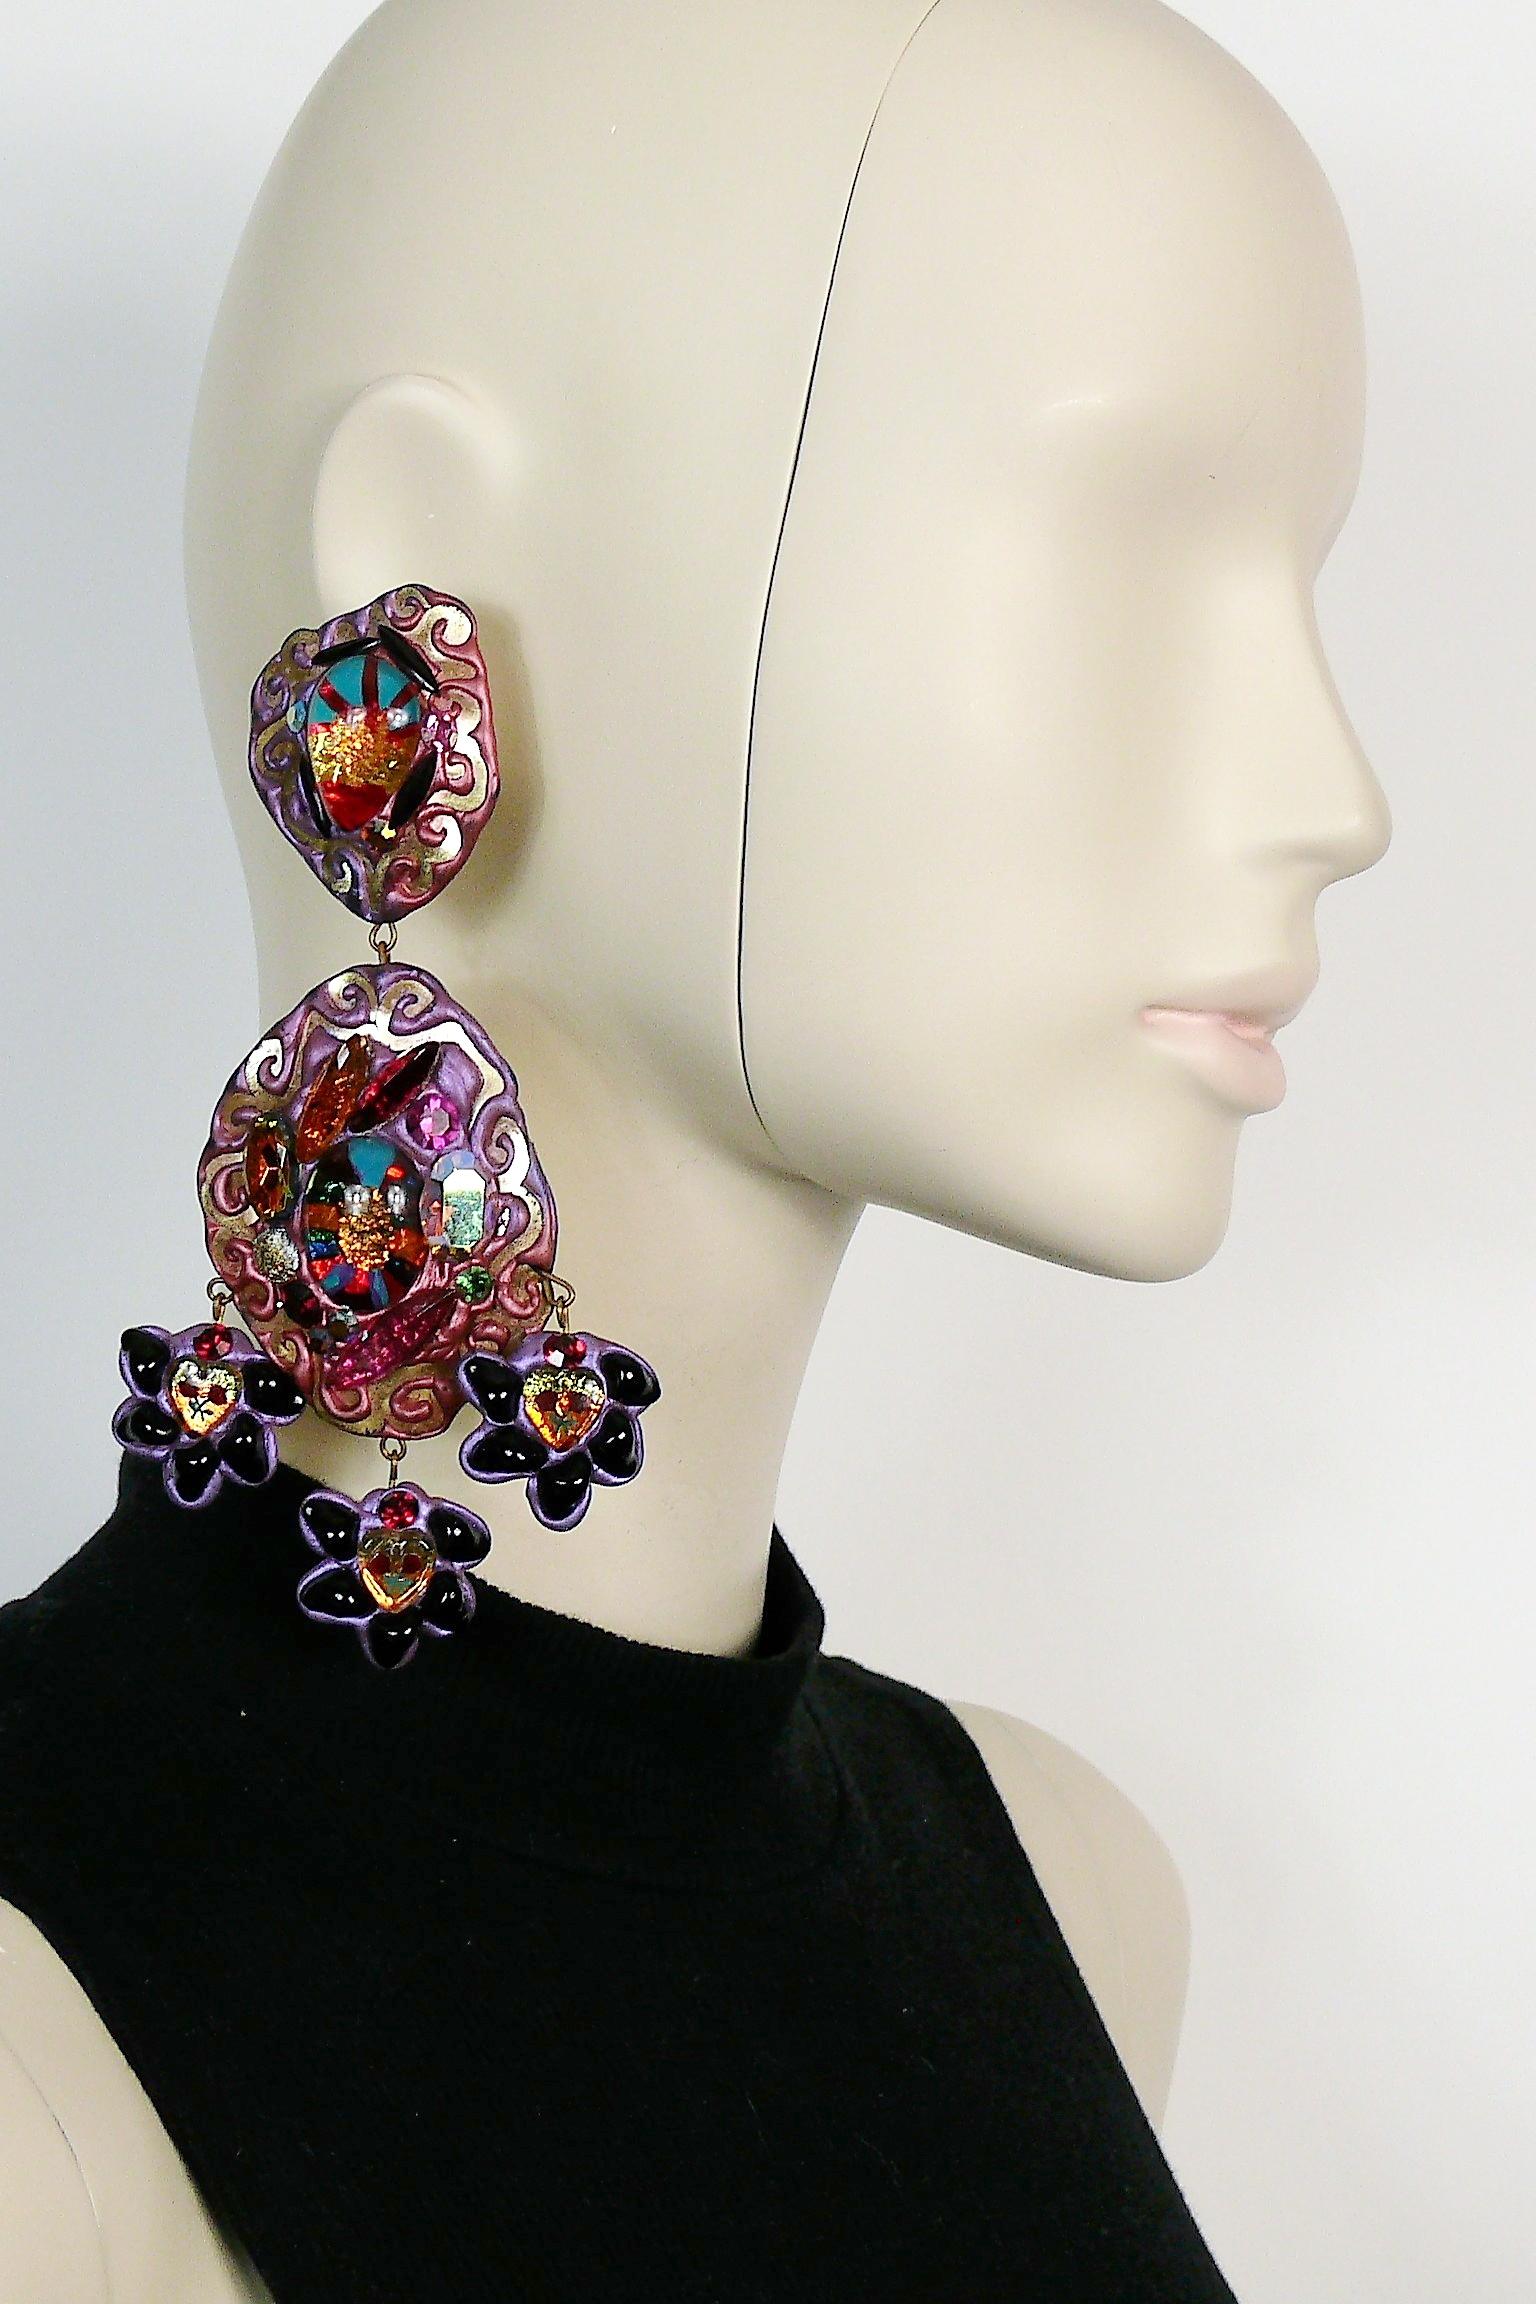 One-of-a-kind vintage French oversized dangling earrings.

These earrings are made of a light weight malleable material (probably rubber or latex) embellished with glass beads, crystals  and a gold tone embossed design.

The ex-owner has confirmed